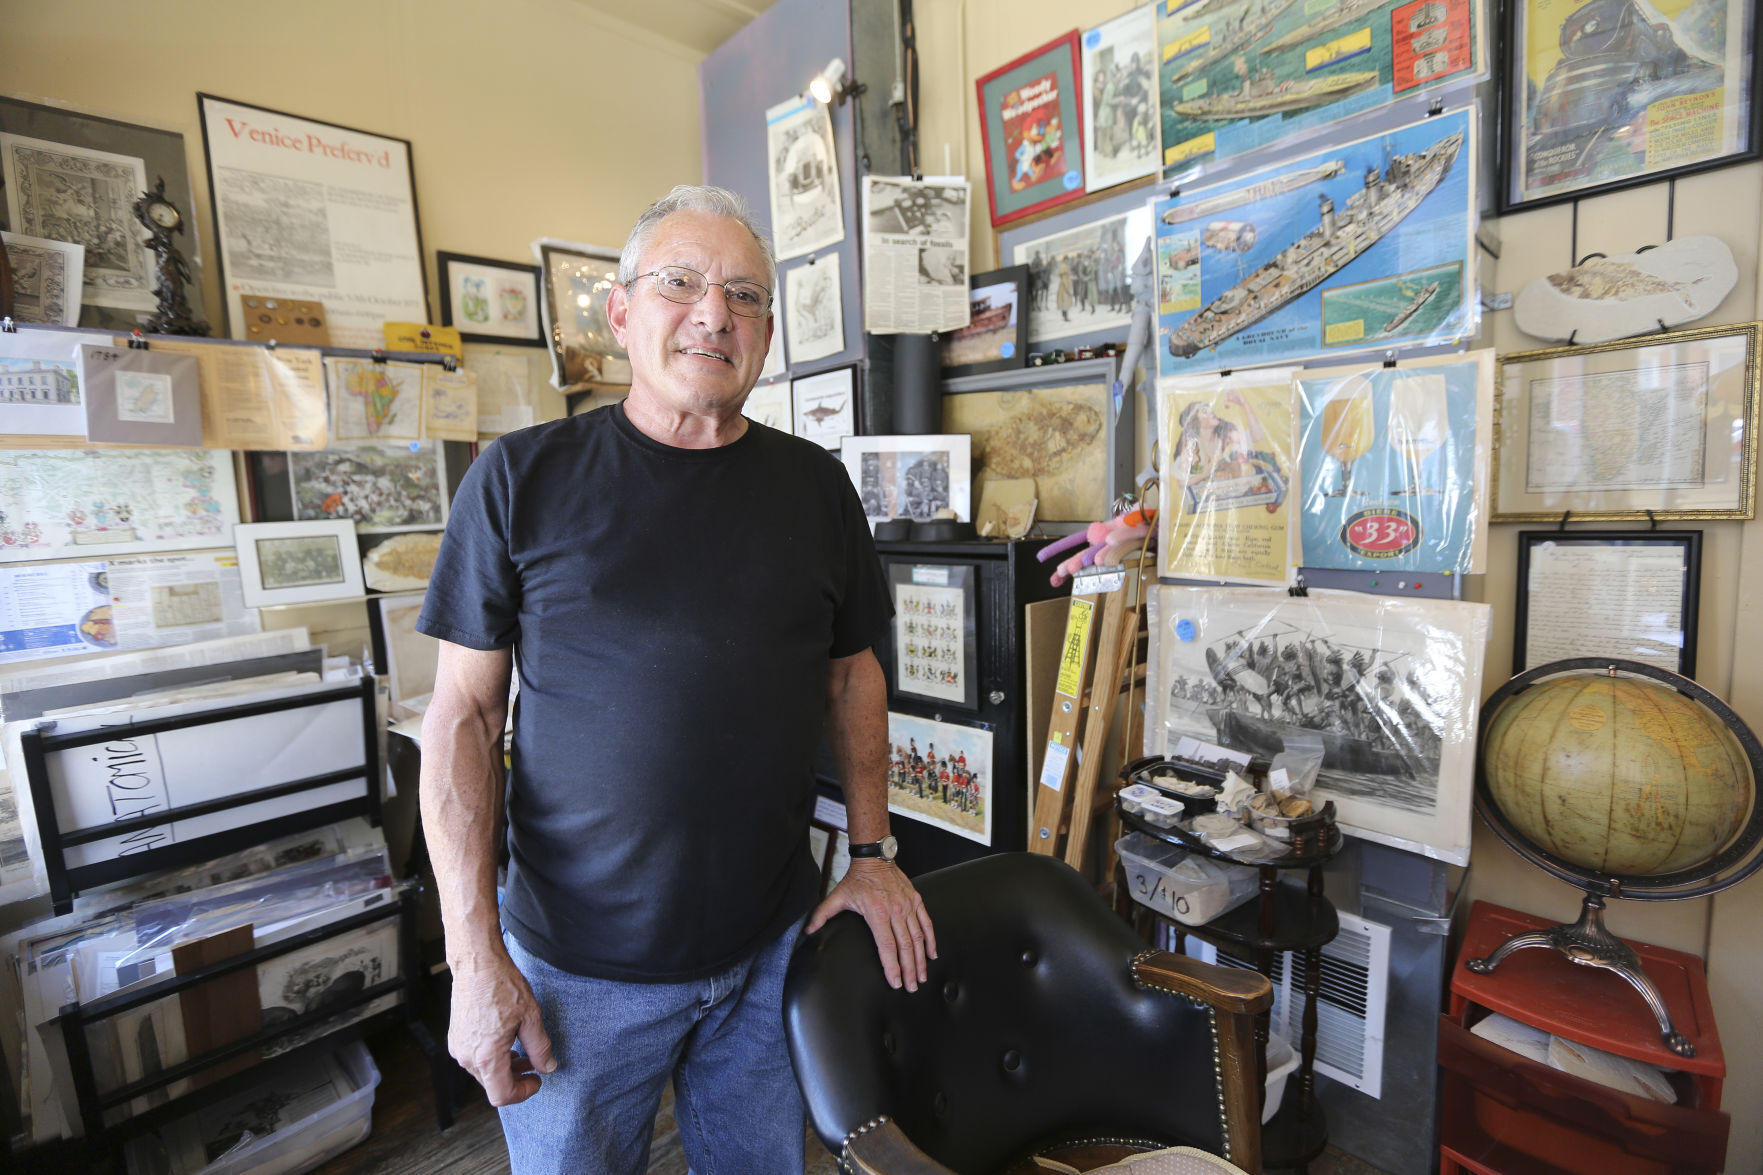 Owner Rick Pariser stands in Rix Antiques on Main Street in Galena, Ill., on Friday, Sept. 2, 2022. Pariser sells fossils, as well as antique maps and prints, that he has collected over the past two decades.    PHOTO CREDIT: Dave Kettering